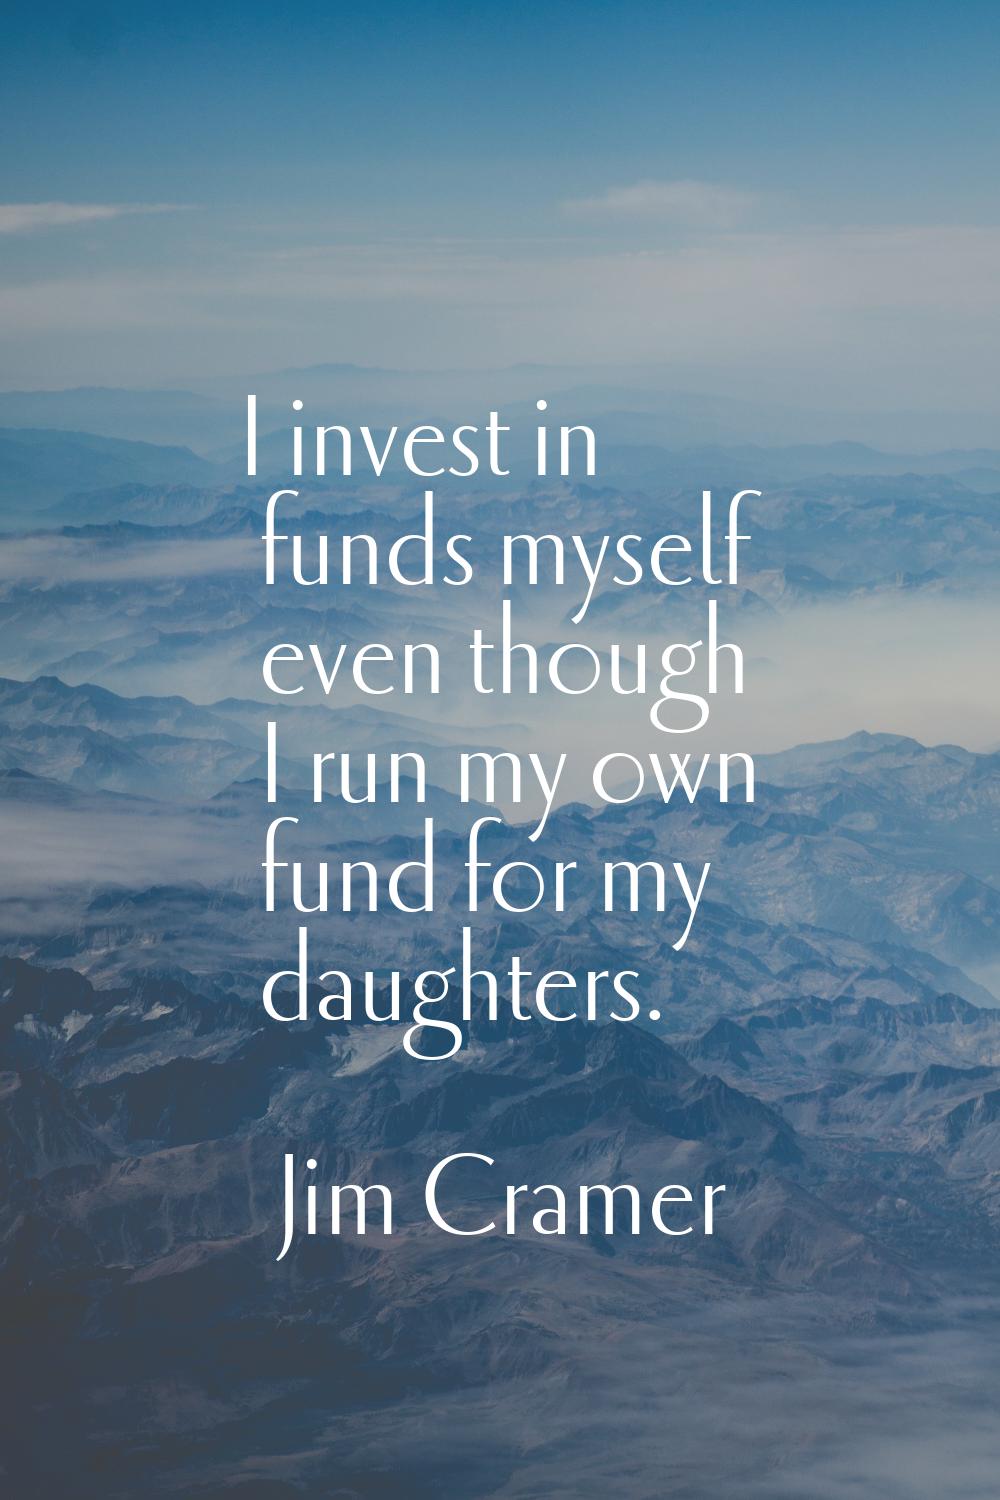 I invest in funds myself even though I run my own fund for my daughters.